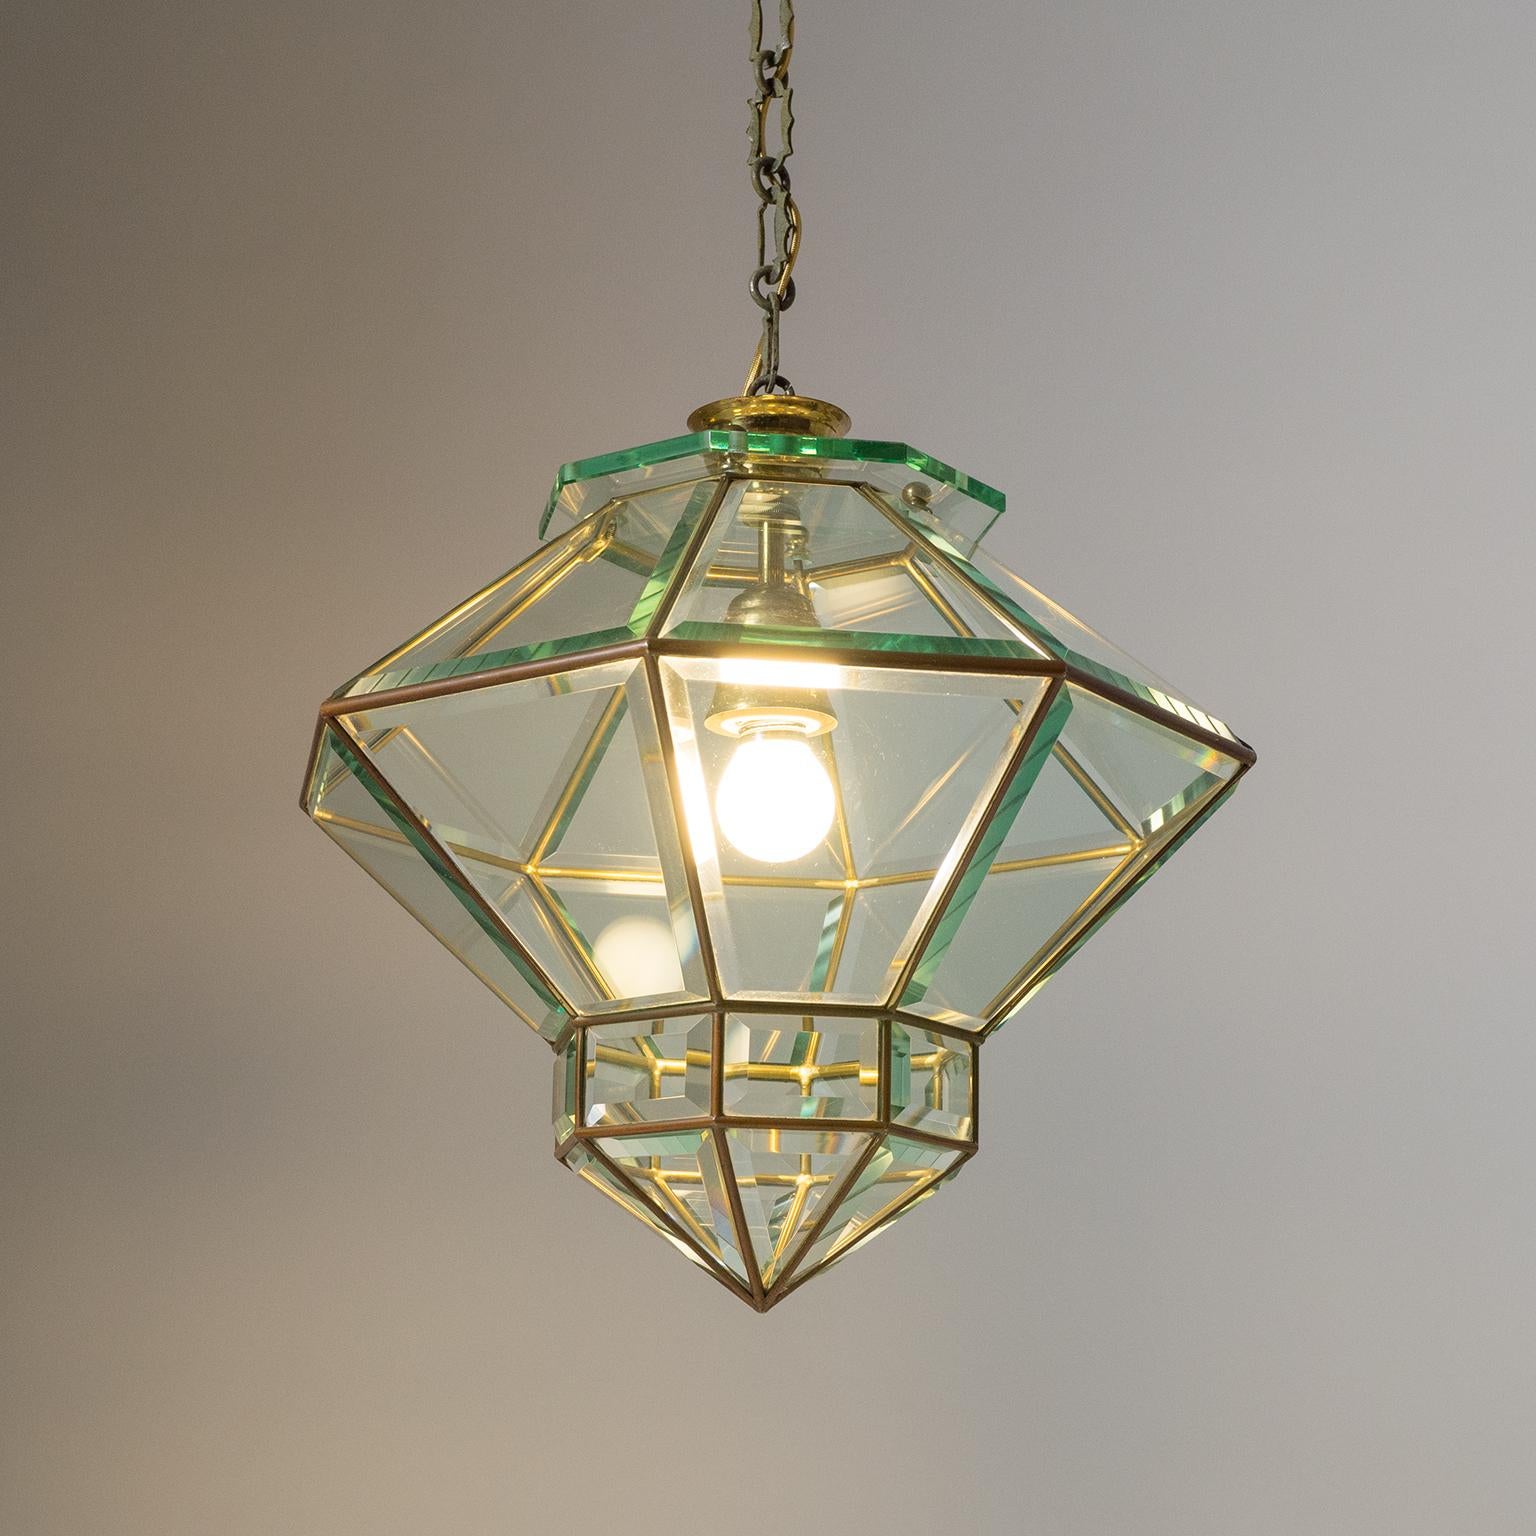 Italian 1940s Lantern, Faceted Glass and Brass 8